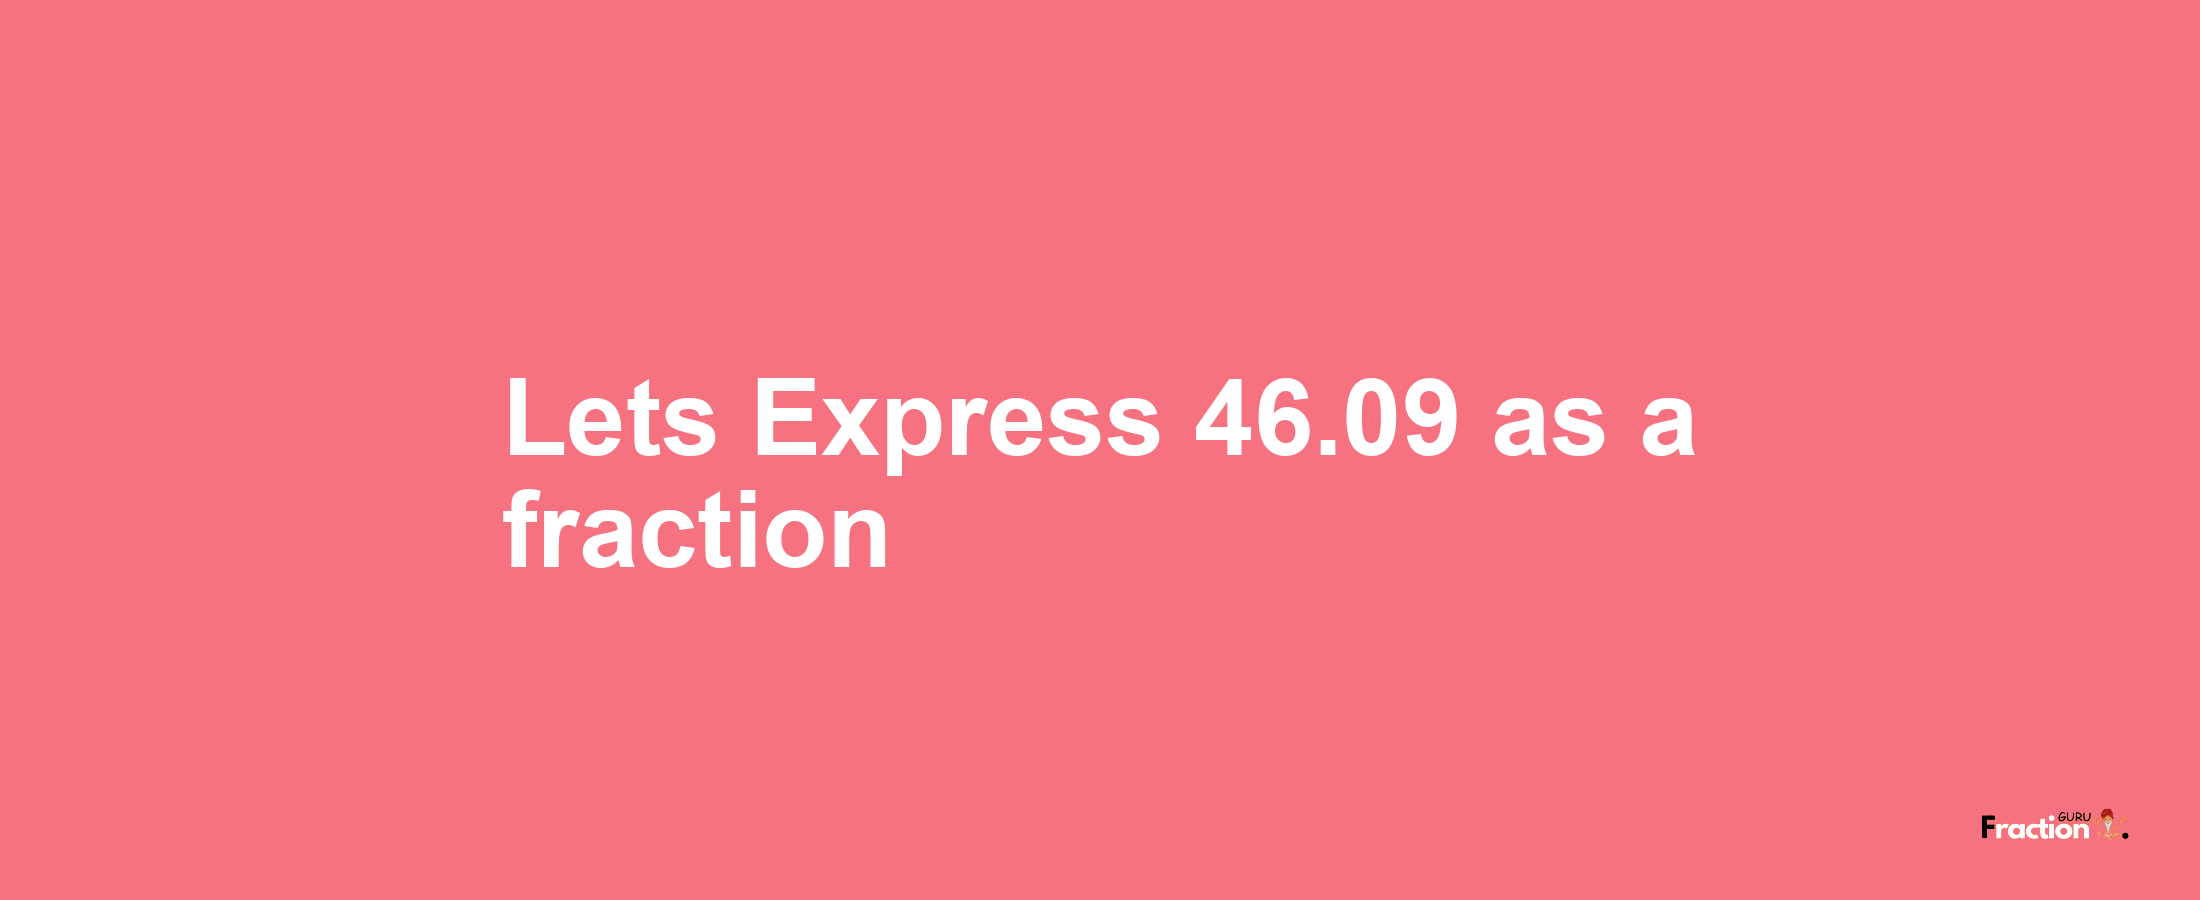 Lets Express 46.09 as afraction